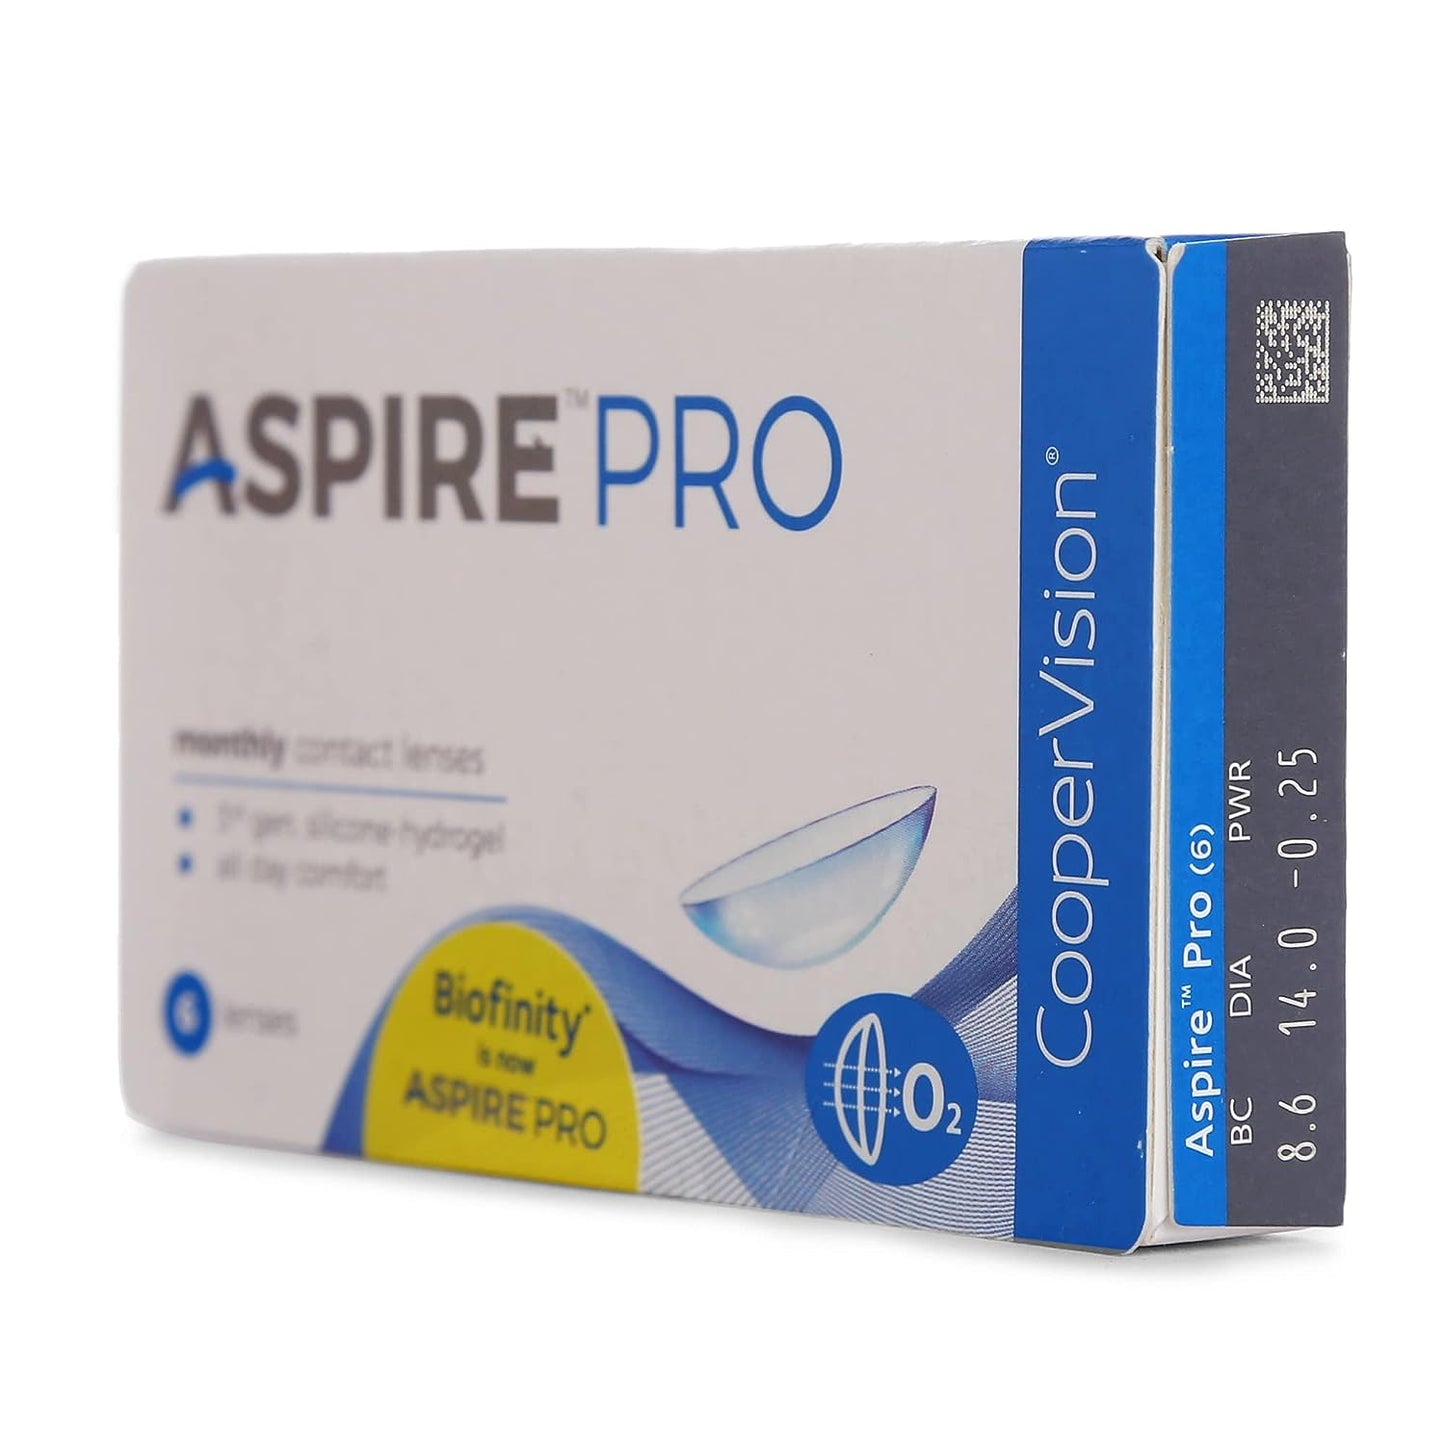 Aspire Pro Monthly Disposable Contact Lens CooperVision ( 6pcs in a Box )